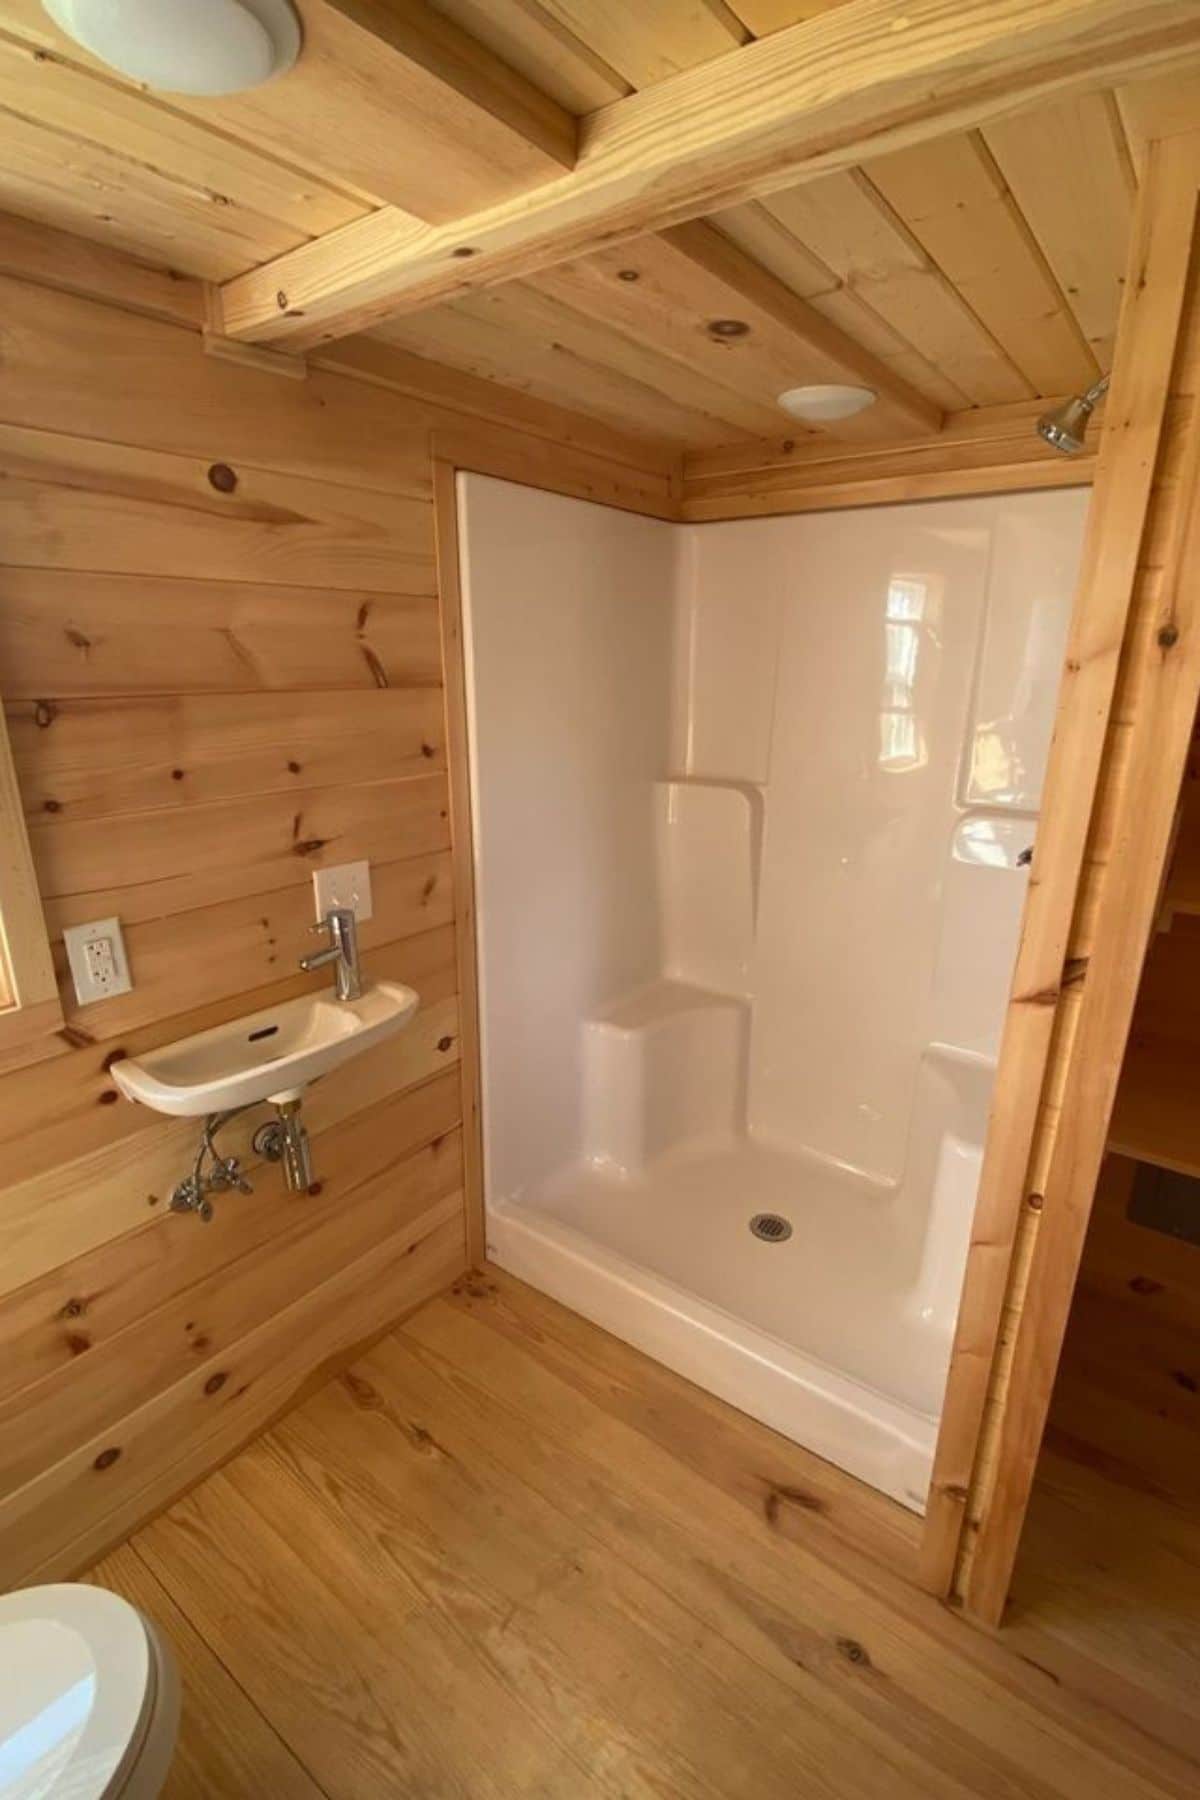 Large white shower stall against wood wall in bathroom